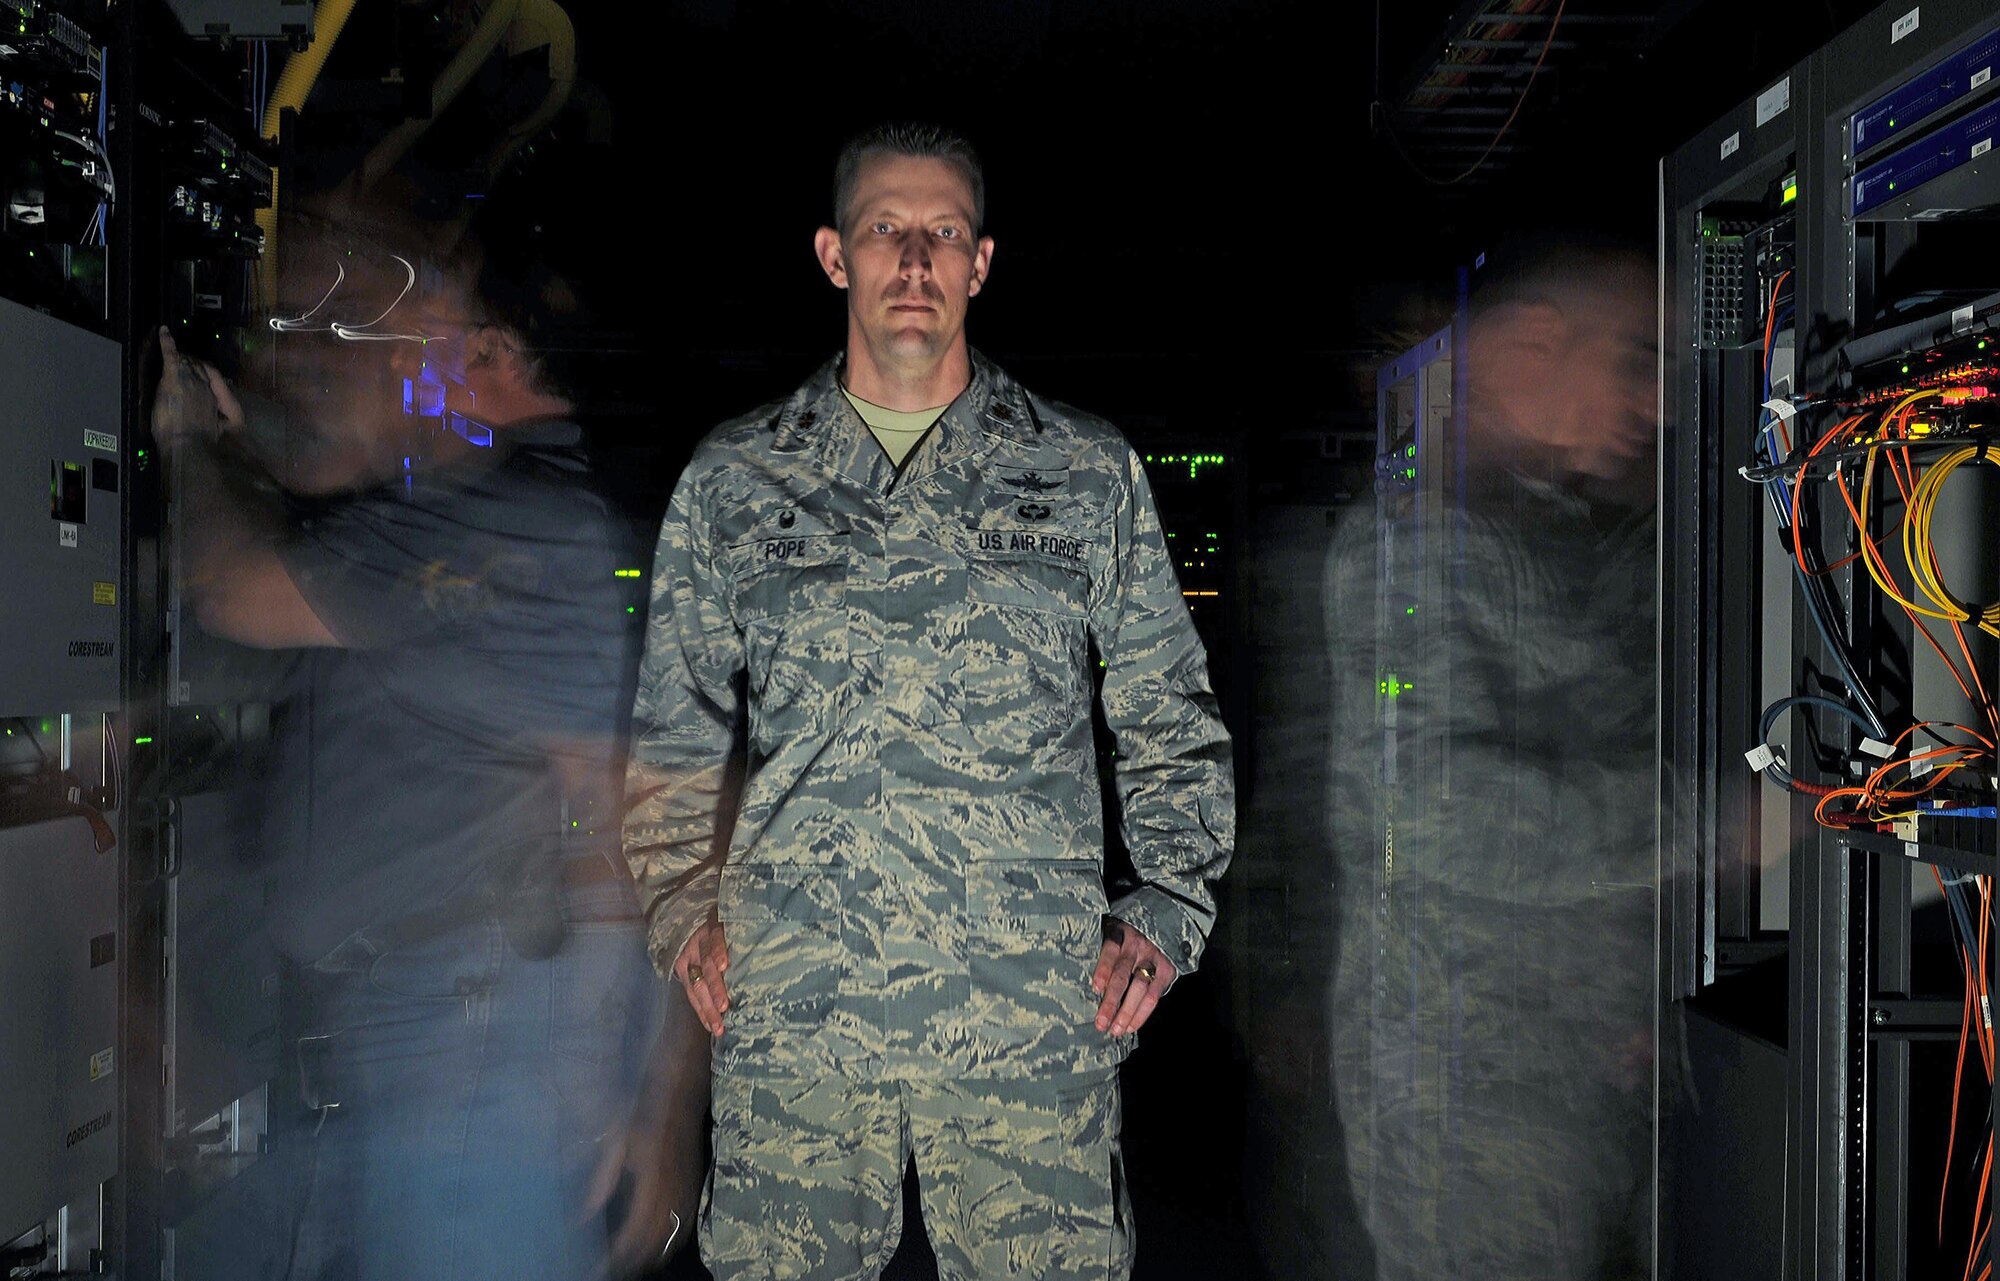 (01)	Maj. Billy Pope Jr., 81st Communications Squadron commander, poses for a photo in the base’s server room March 9, 2015, Keesler Air Force Base, Miss. Pope took command of the 81st CS in June 2014.This is his first assignment as a commander. (U.S. Air Force photo by Airman 1st Class Duncan McElroy)